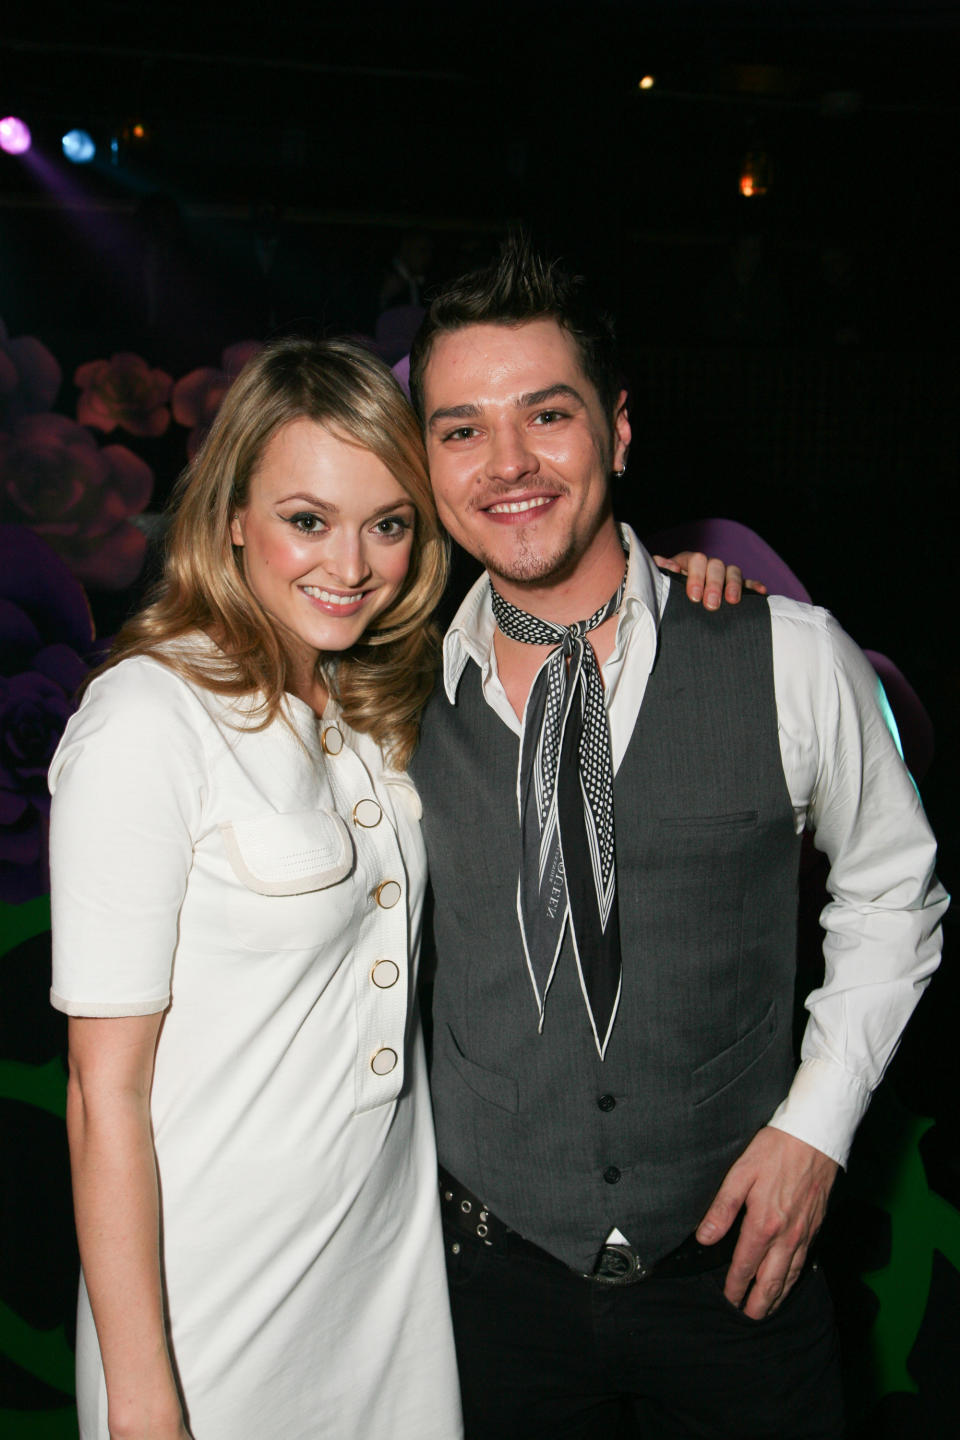 Matt Willis, pictured with Fearne Cotton in back 2007, opened up about his struggles with addiction. (Getty Images)